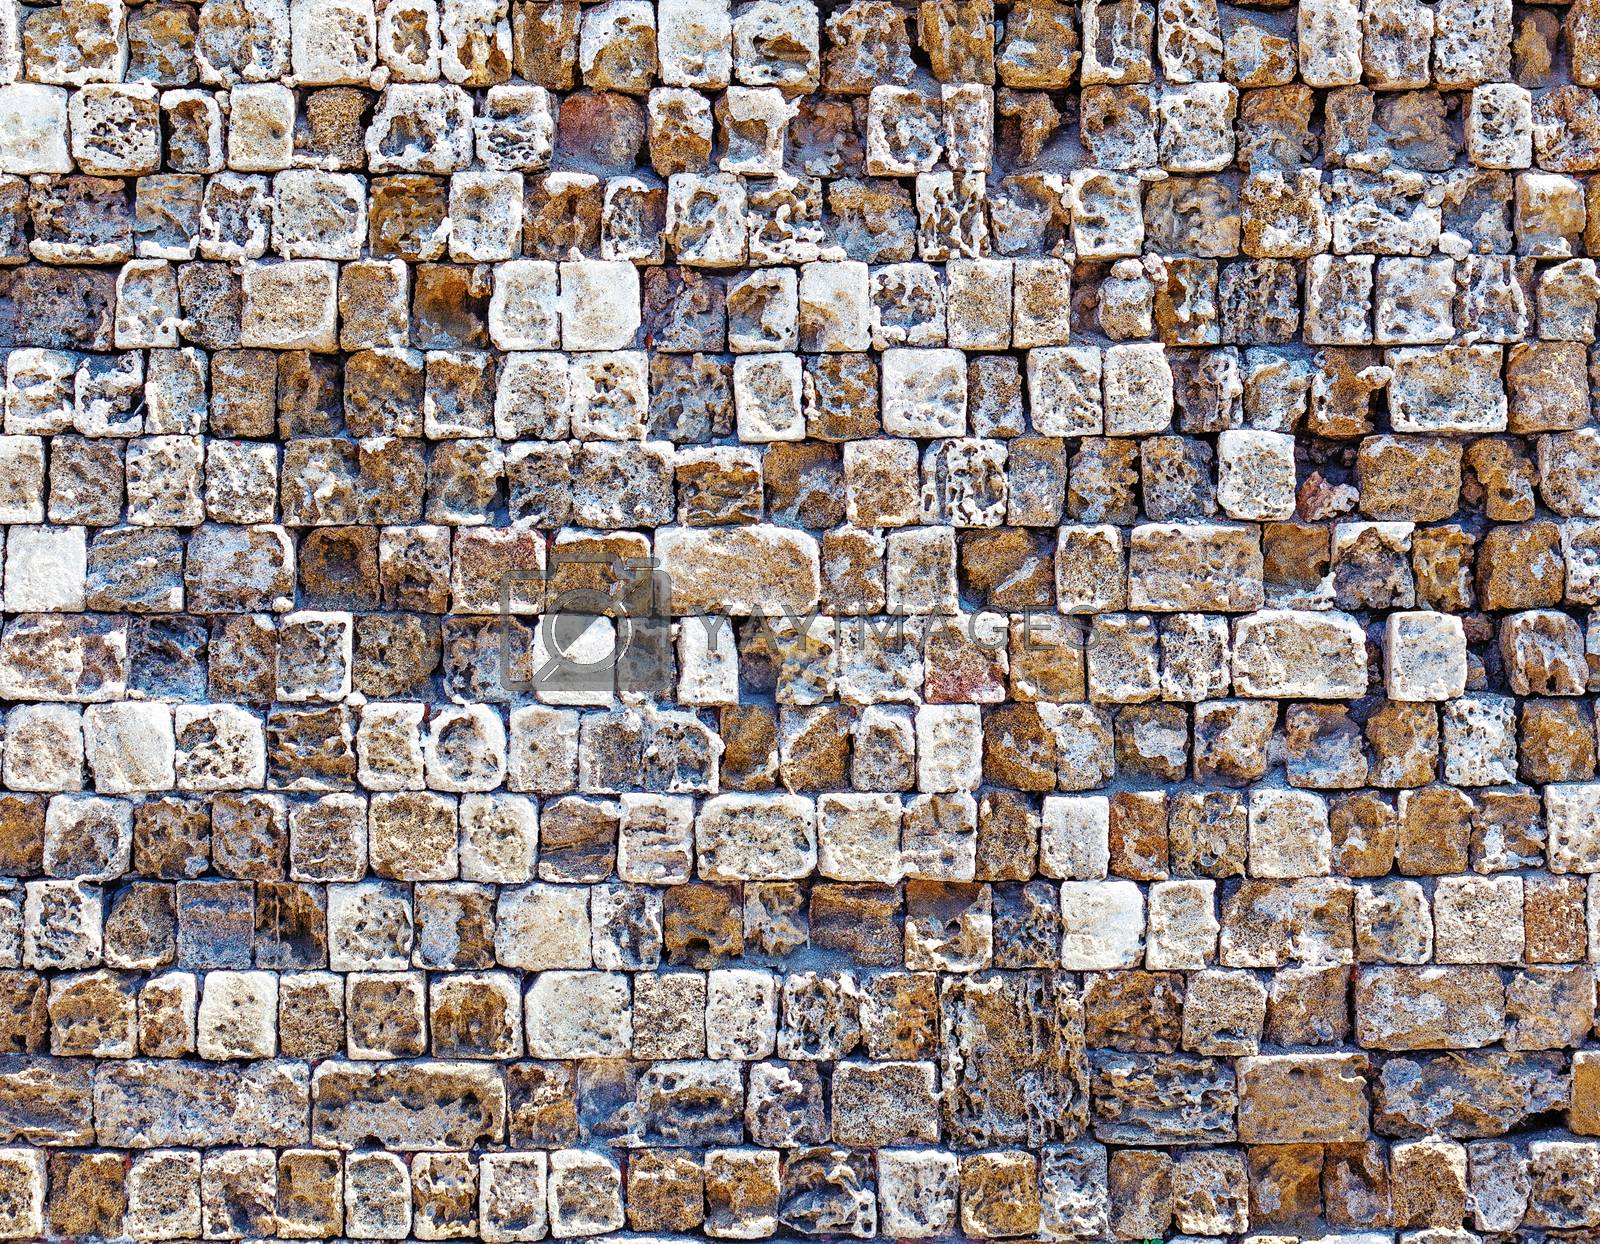 Royalty free image of old stone wall texture photo by vicnt